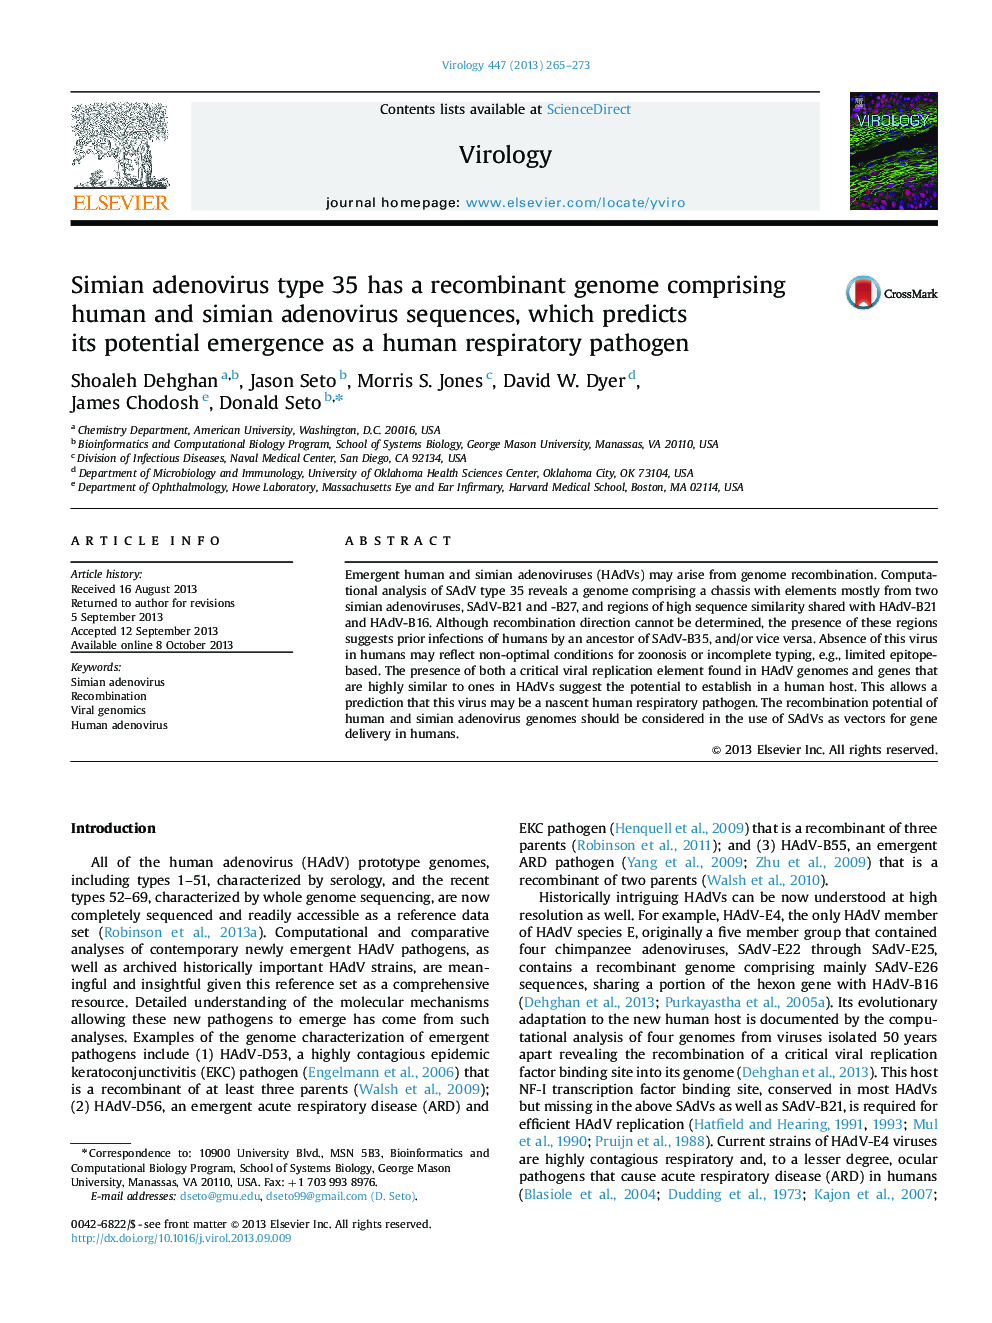 Simian adenovirus type 35 has a recombinant genome comprising human and simian adenovirus sequences, which predicts its potential emergence as a human respiratory pathogen